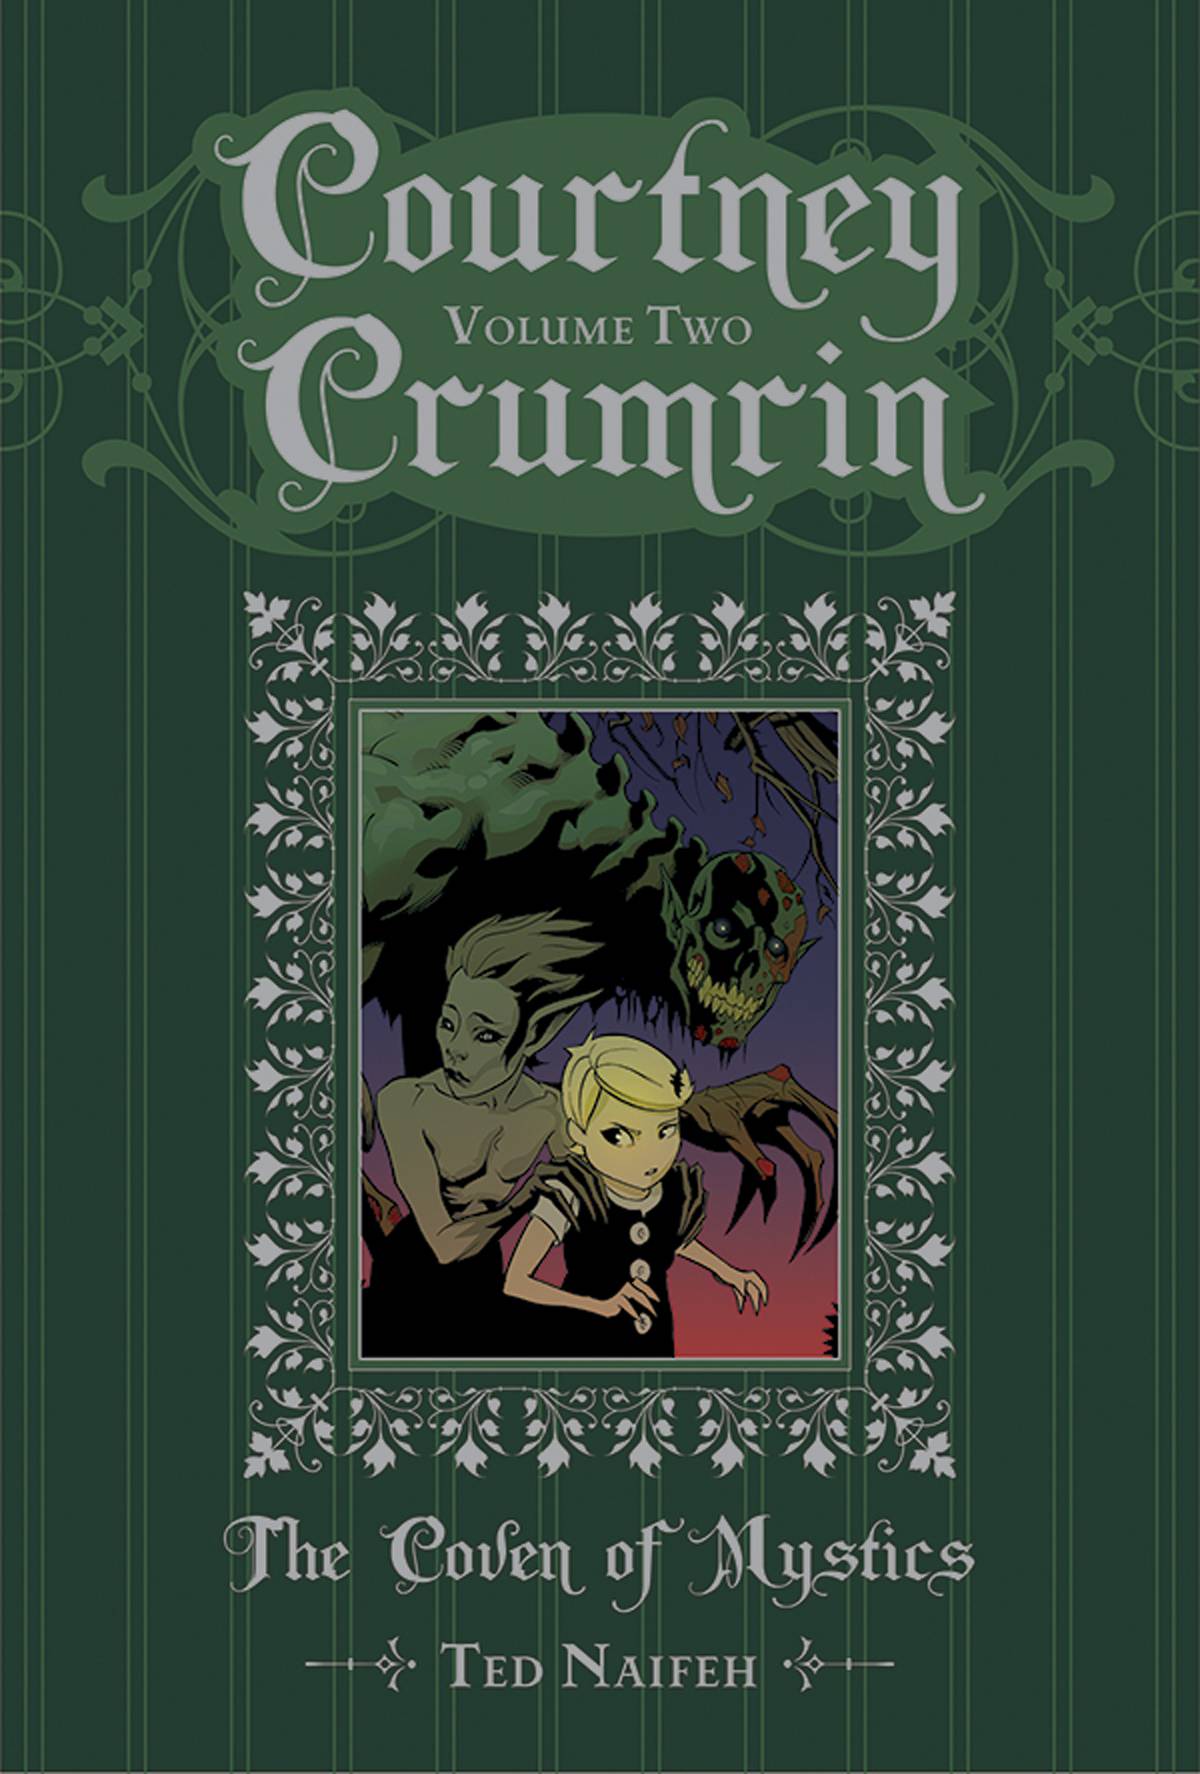 Courtney Crumrin Special Edition Hardcover Volume 2